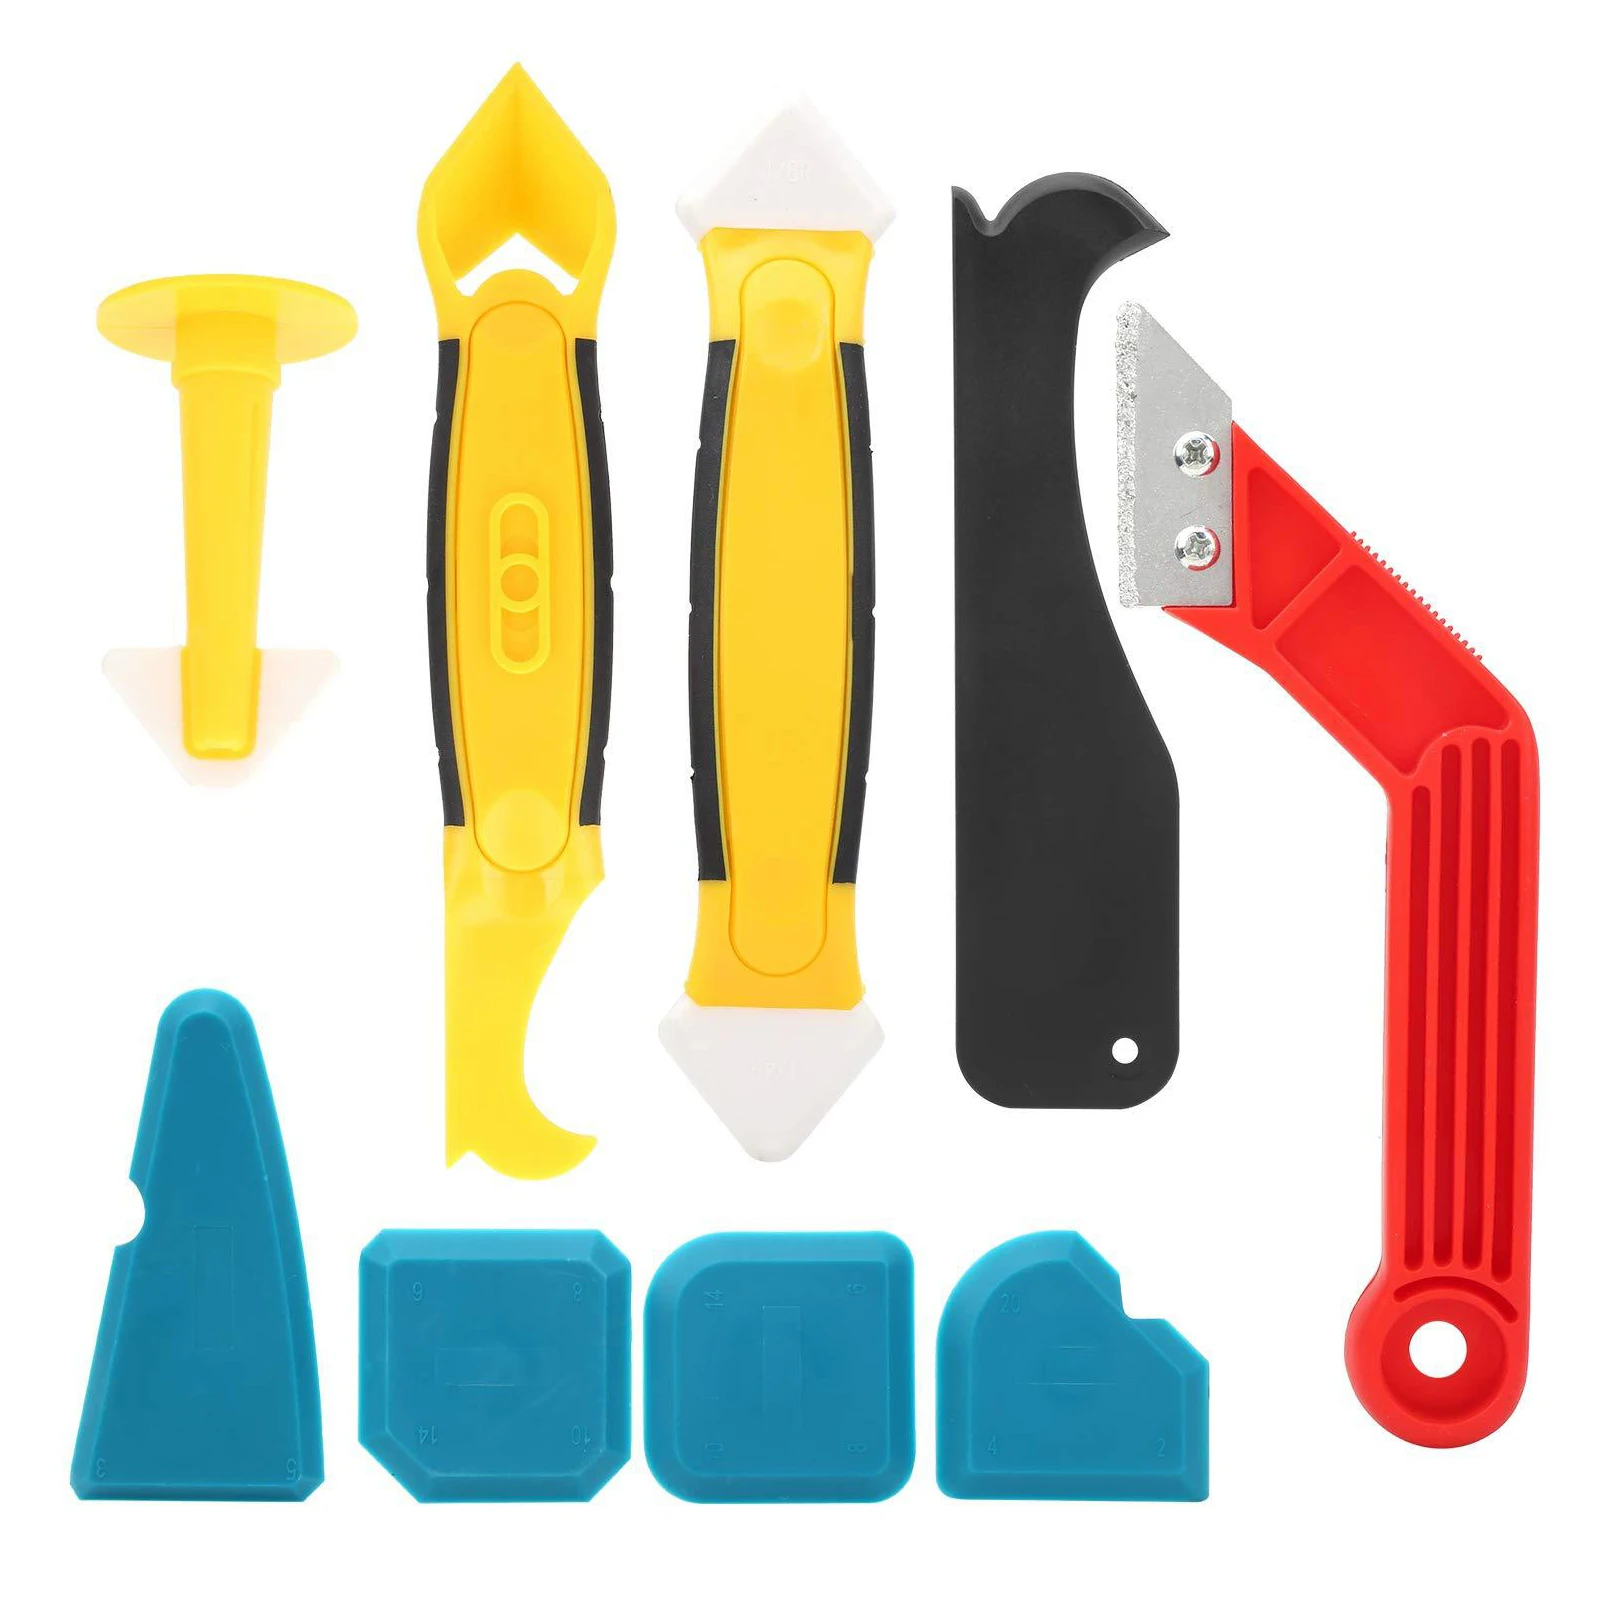 

9pcs Silicone Remover Smoother Floor Bathroom Window Sealant Finishing Joint Grout Scraper Scratch Caulking Tool Kit Kitchen